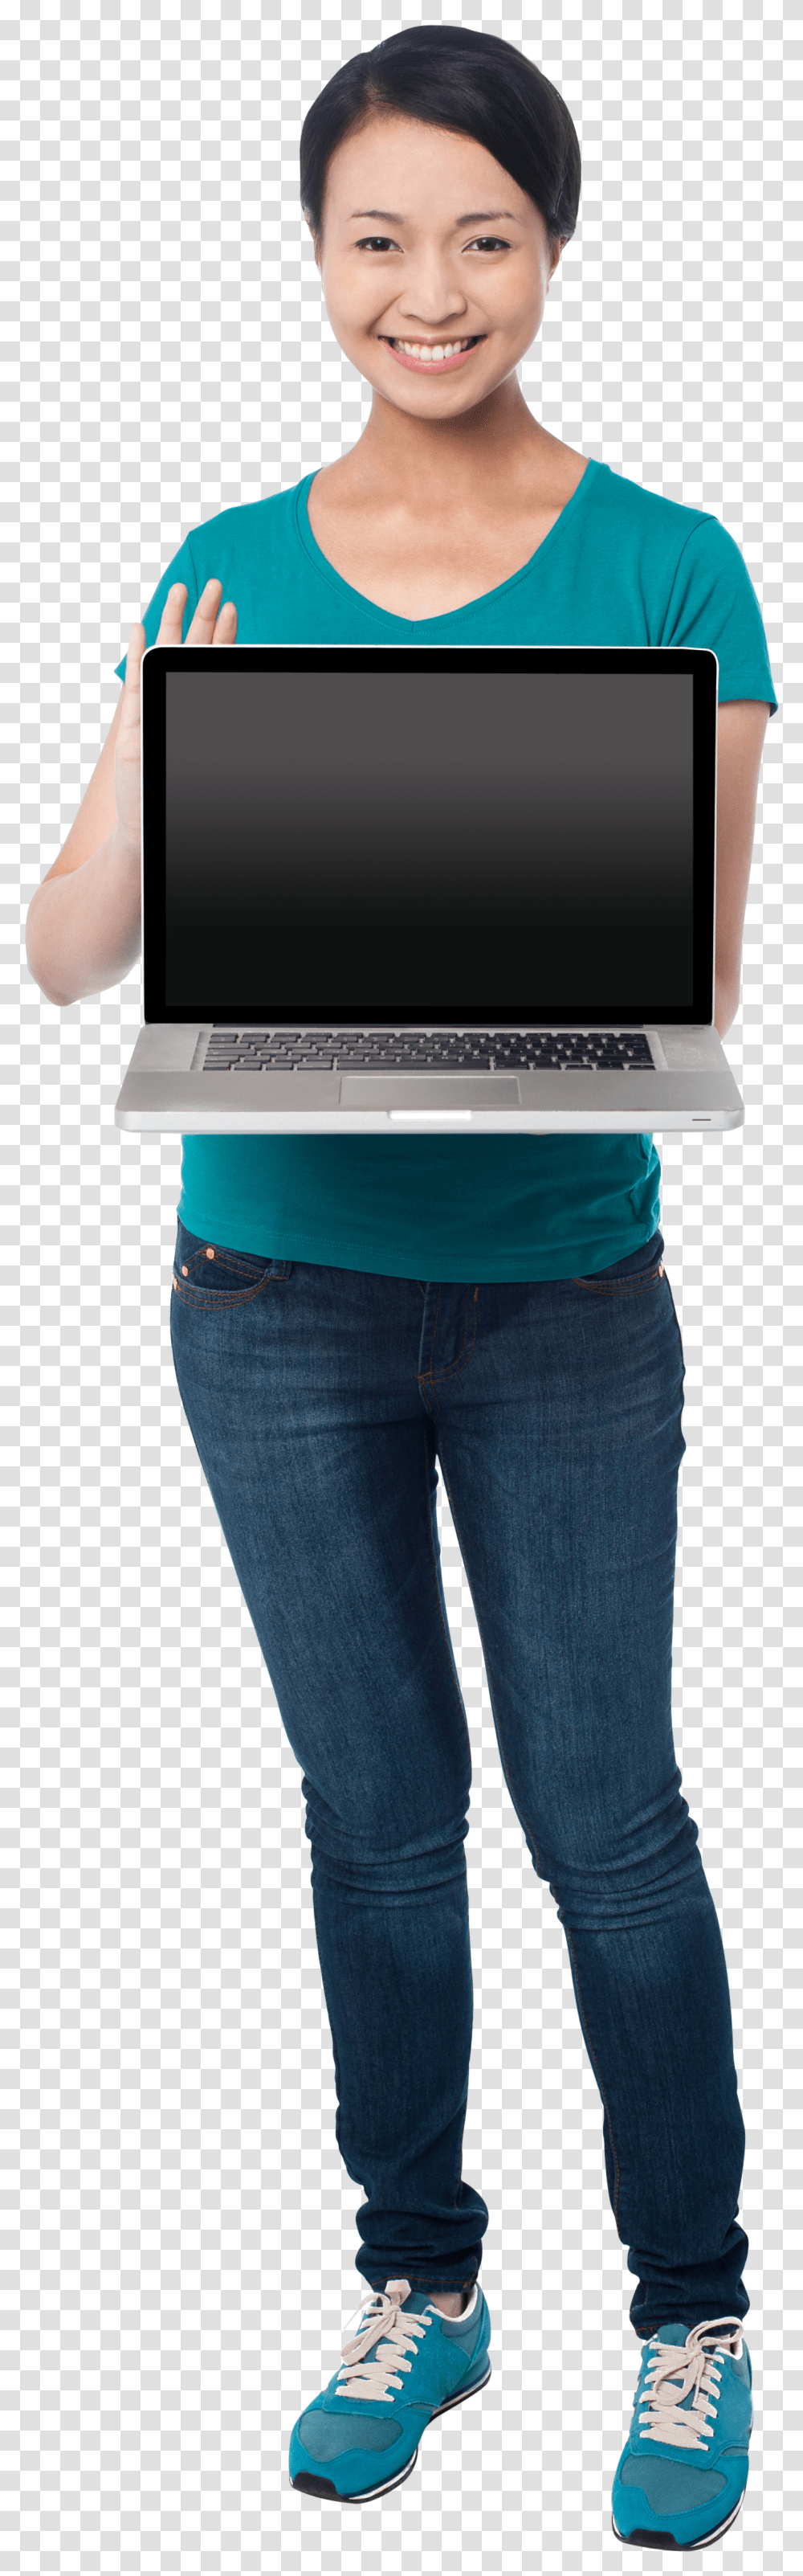 Girl With Laptop Woman With Laptop Transparent Png